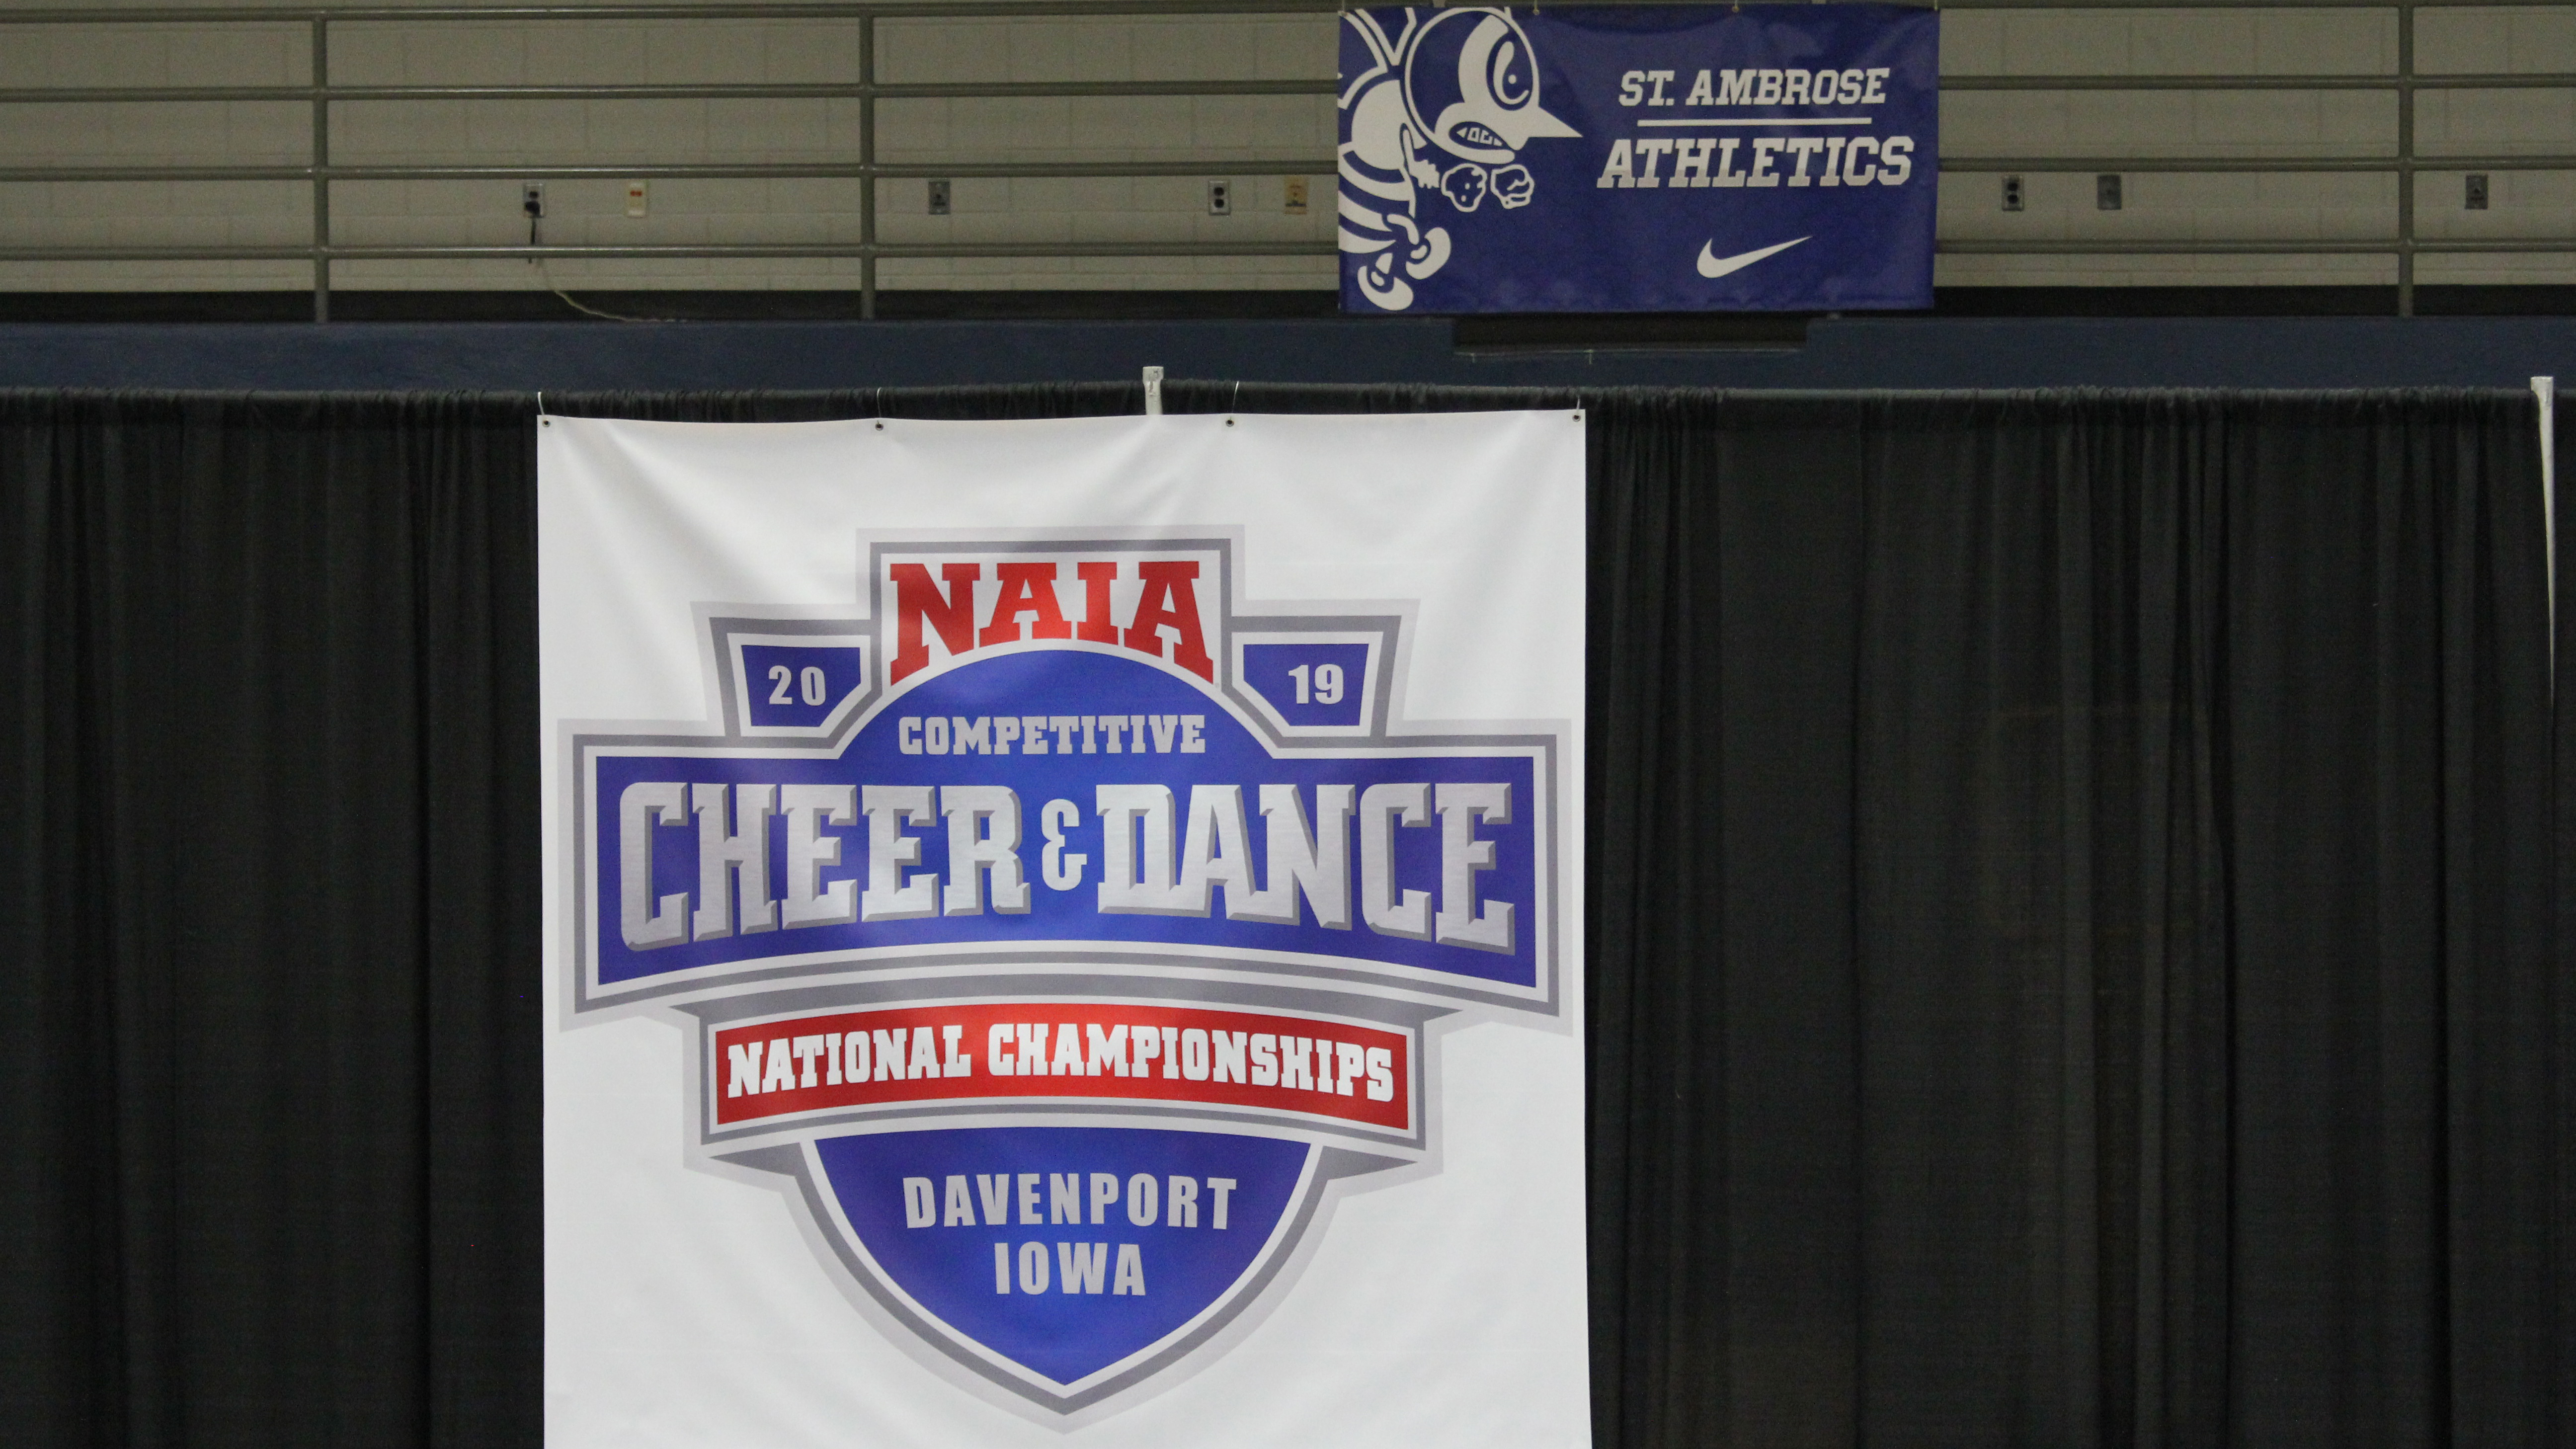 Day 1 - 2019 NAIA Competitive Cheer Championship